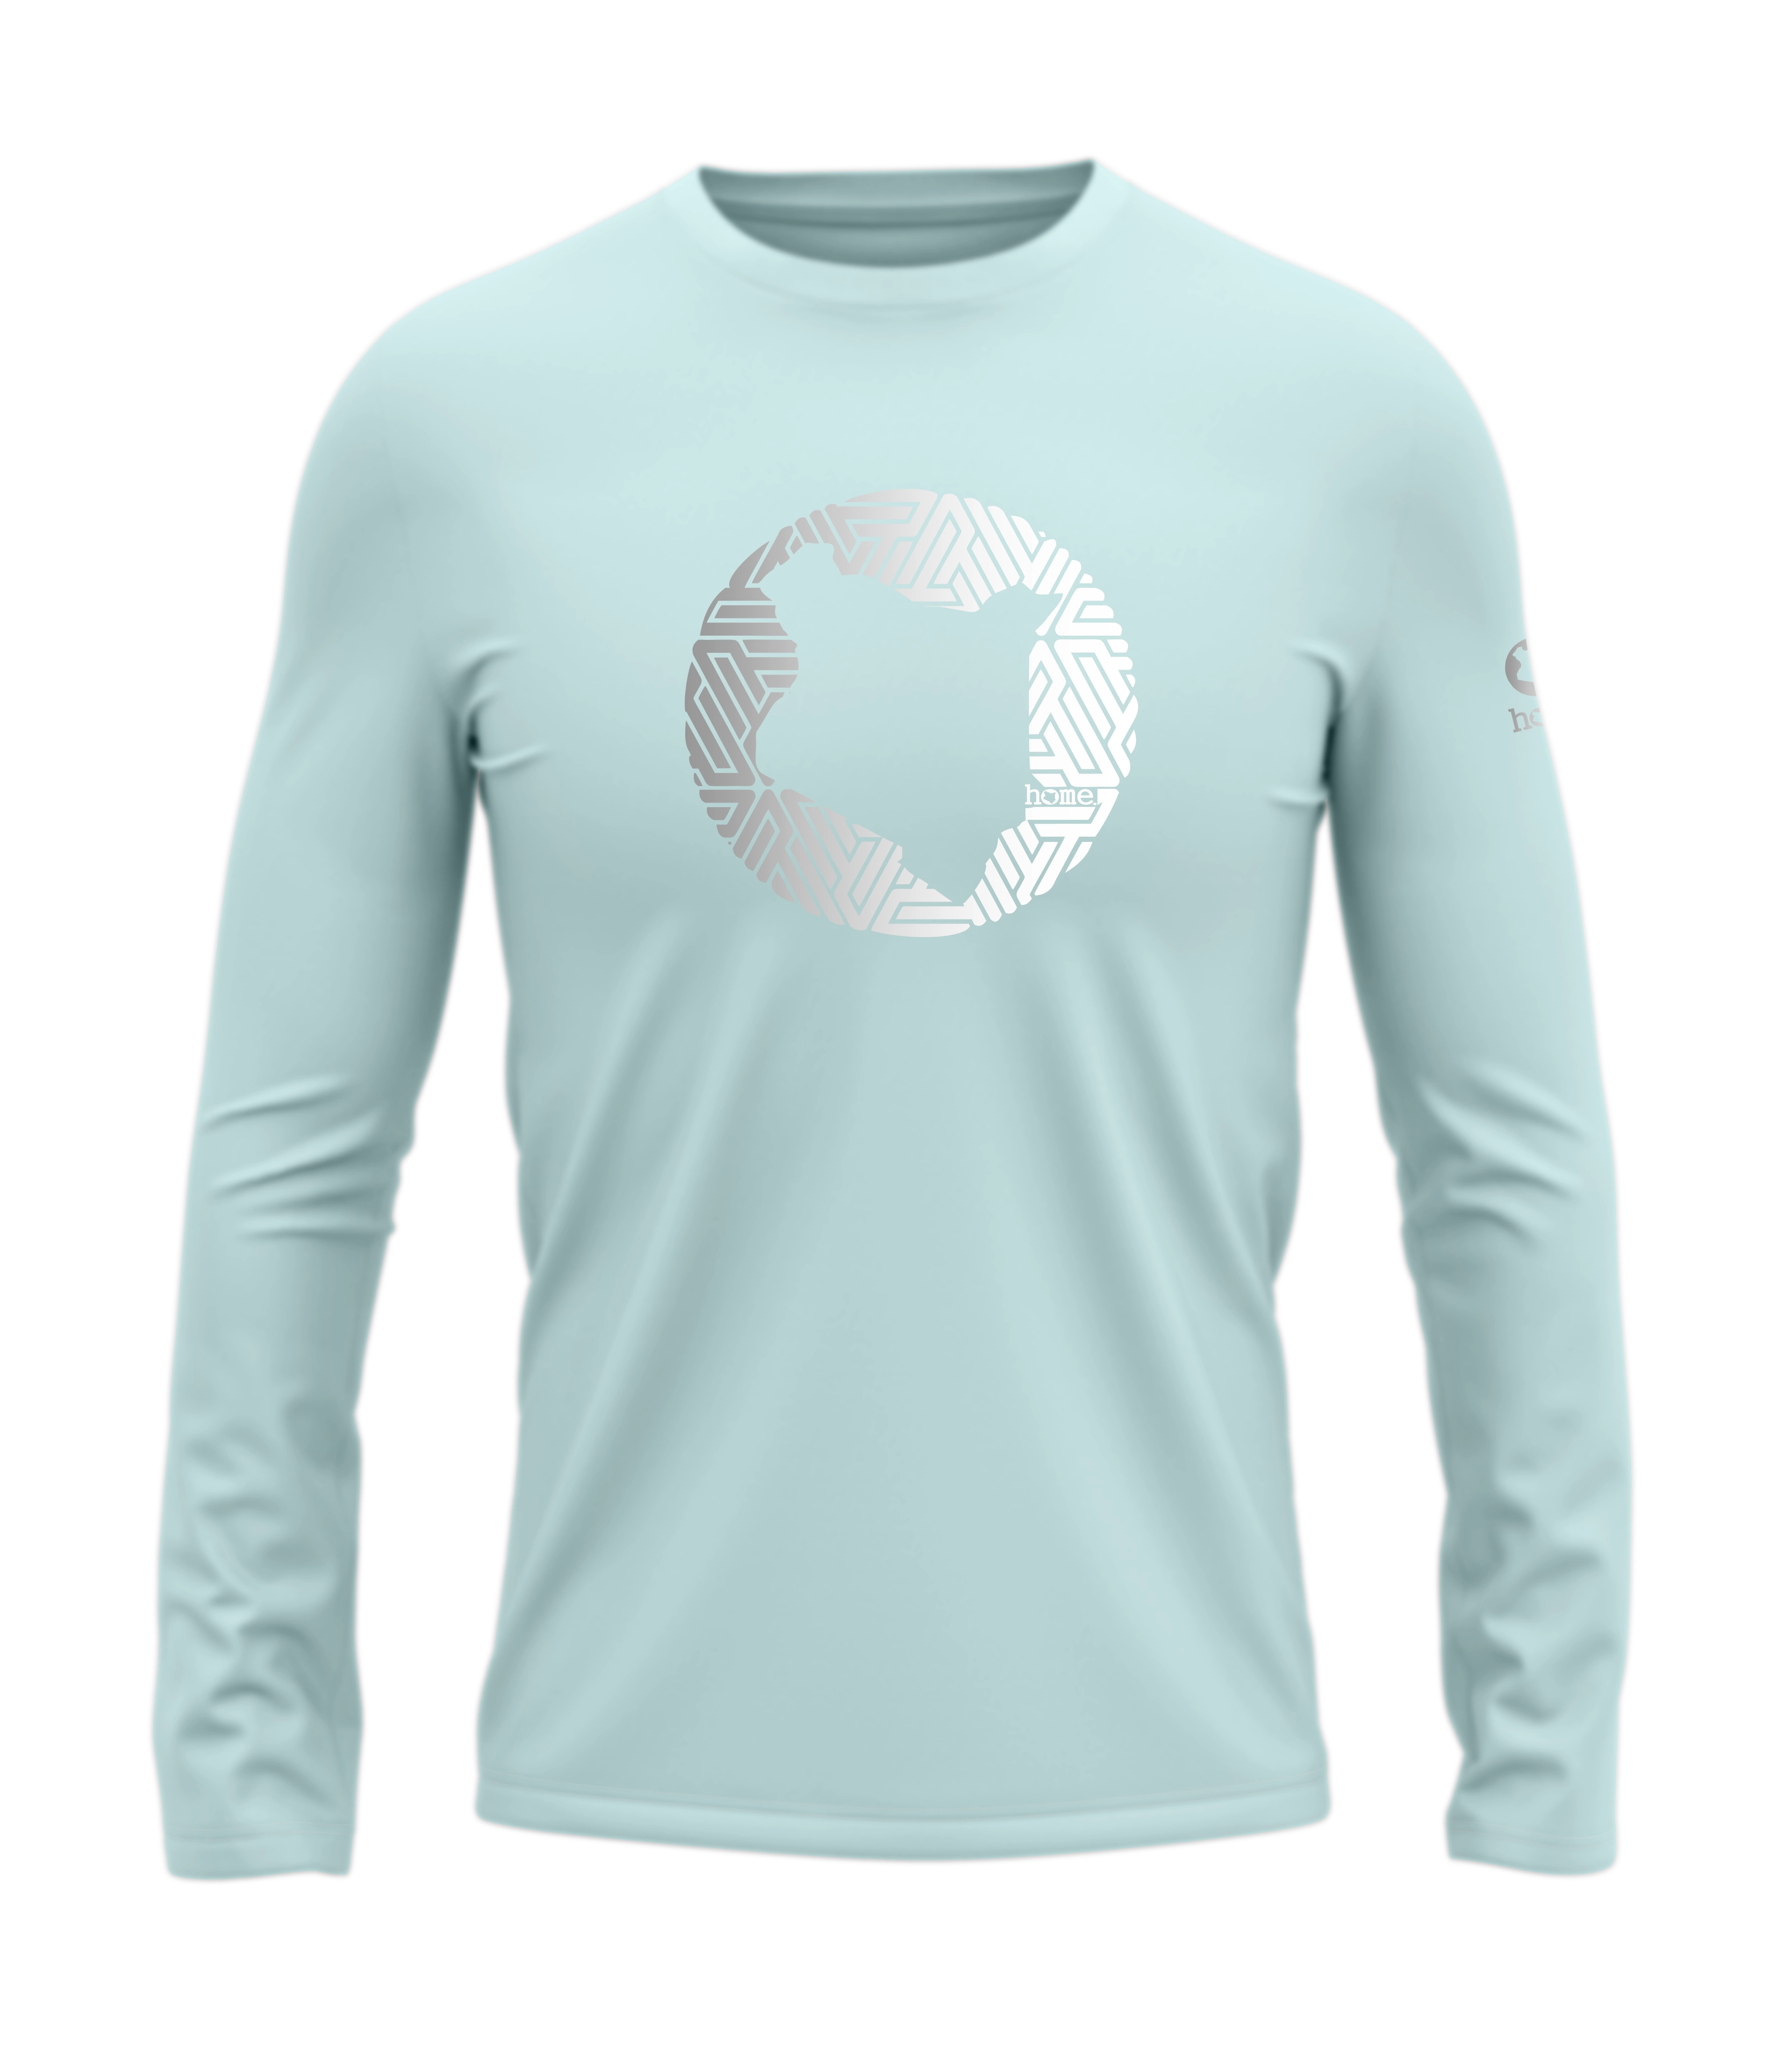 home_254 LONG-SLEEVED MISTY BLUE T-SHIRT WITH A SILVER MAP PRINT – COTTON PLUS FABRIC